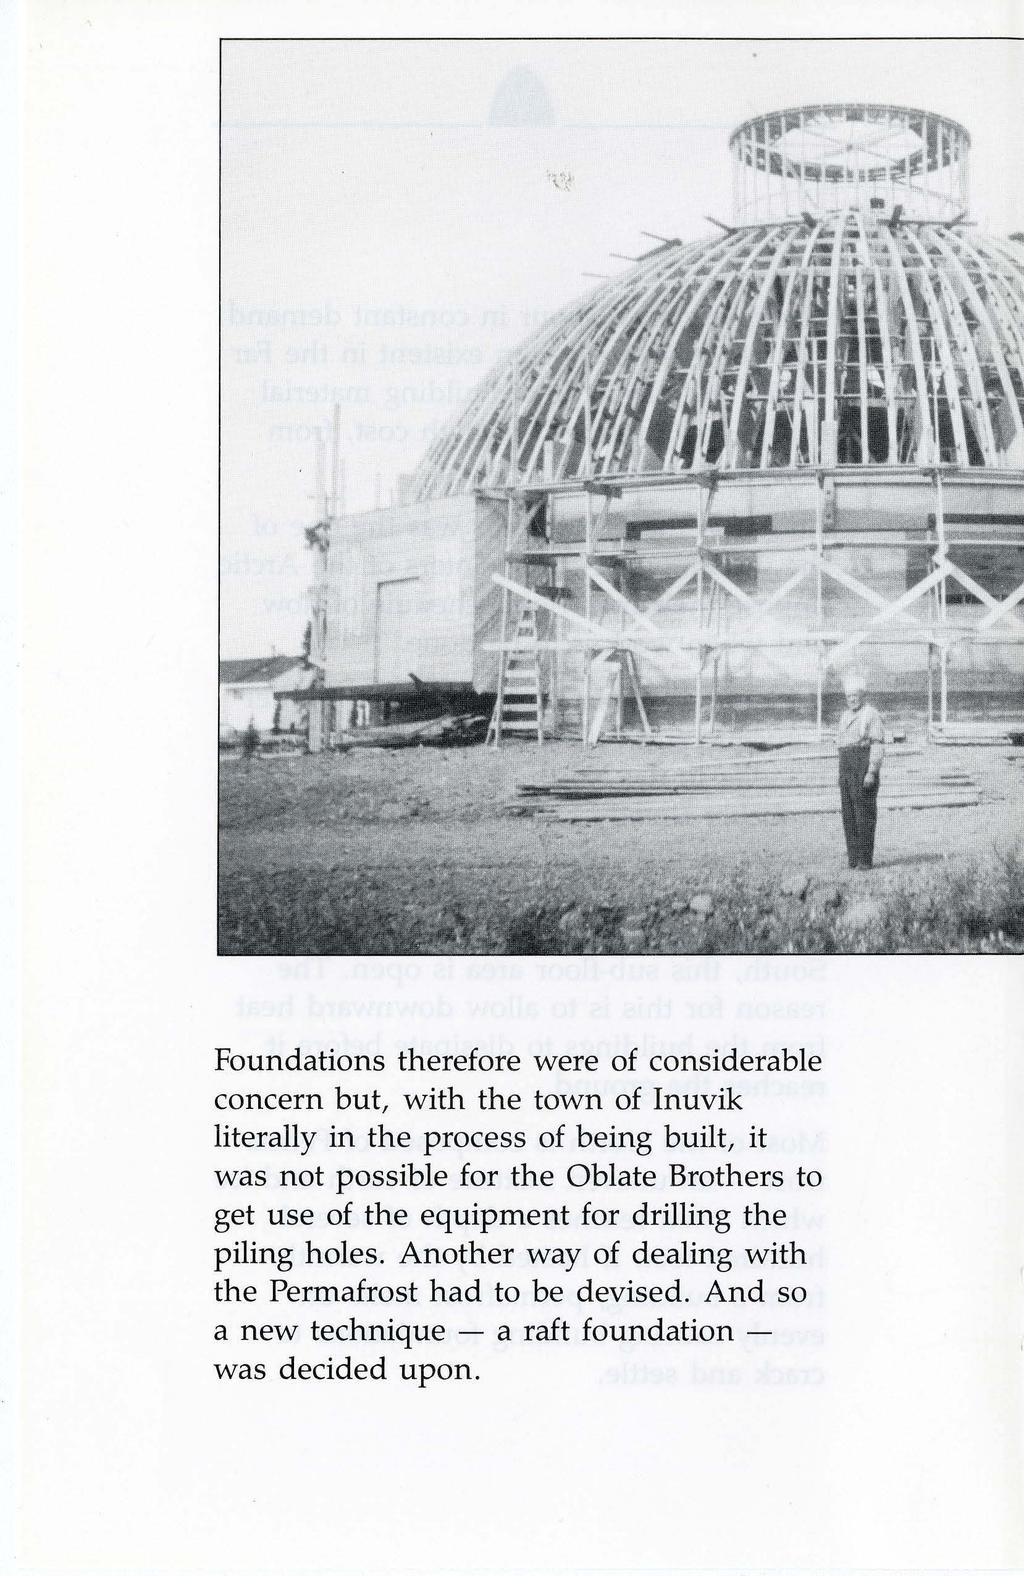 Foundations therefore were of considerable concern but, with the town of Inuvik literally in the process of being built, it was not possible for the Oblate Brothers to get